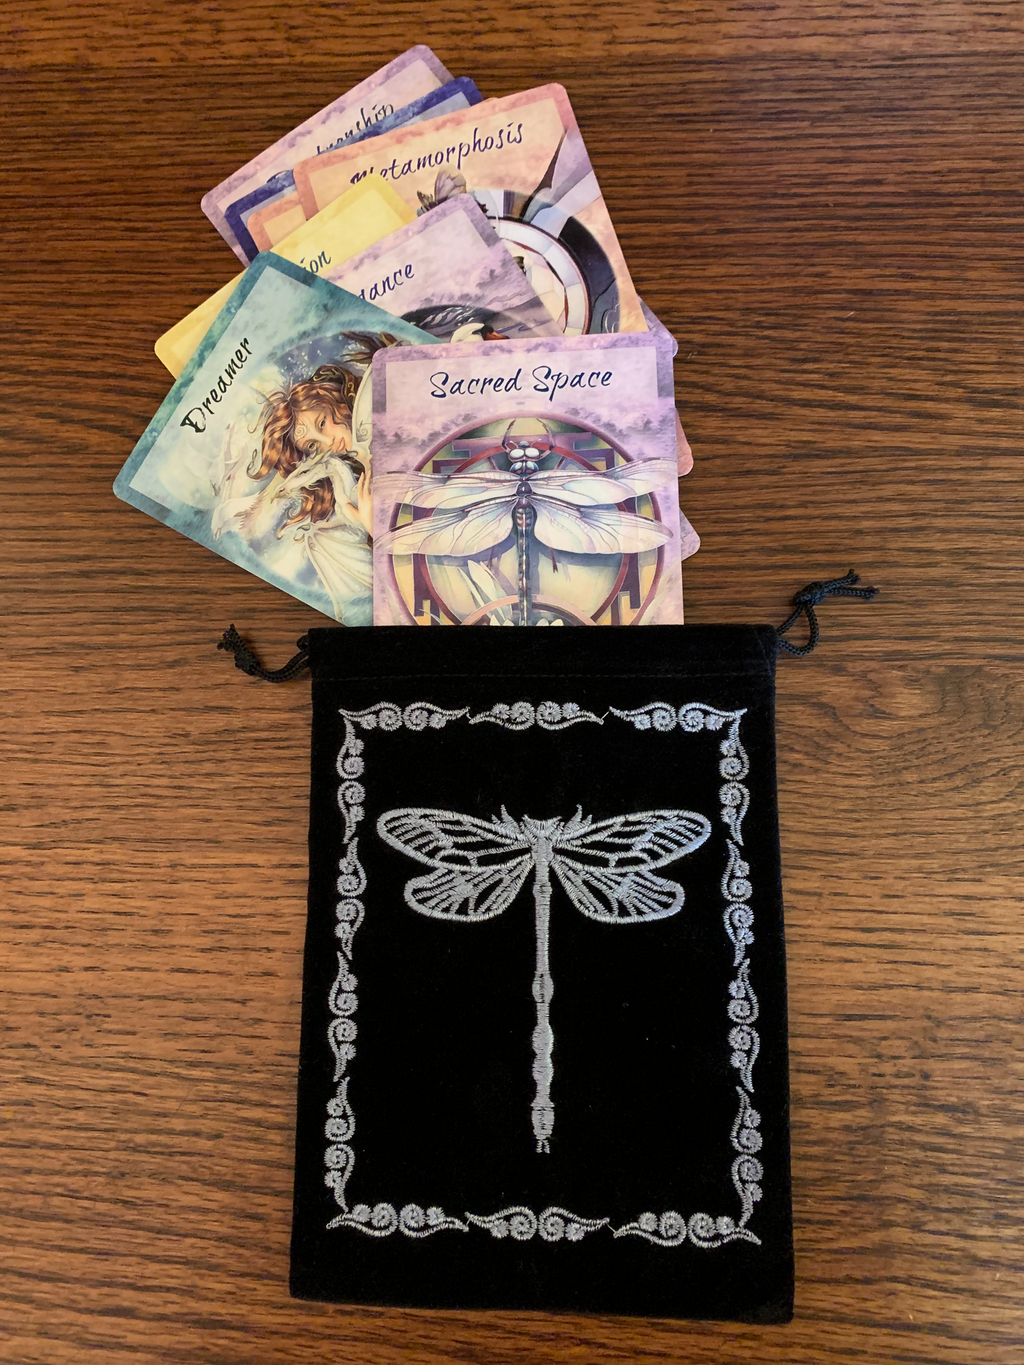 Lovely oracle/tarot deck bag with drawstrings for closure. It is black faux velvet with a light blue colored dragonfly embroidered on it with a border around it. This 7"x5" bag can fit most any deck, but is best suited for larger decks (e.g. Medicine Cards). It can also be used to hold and protect large crystals or other precious items. Cost is $7.50